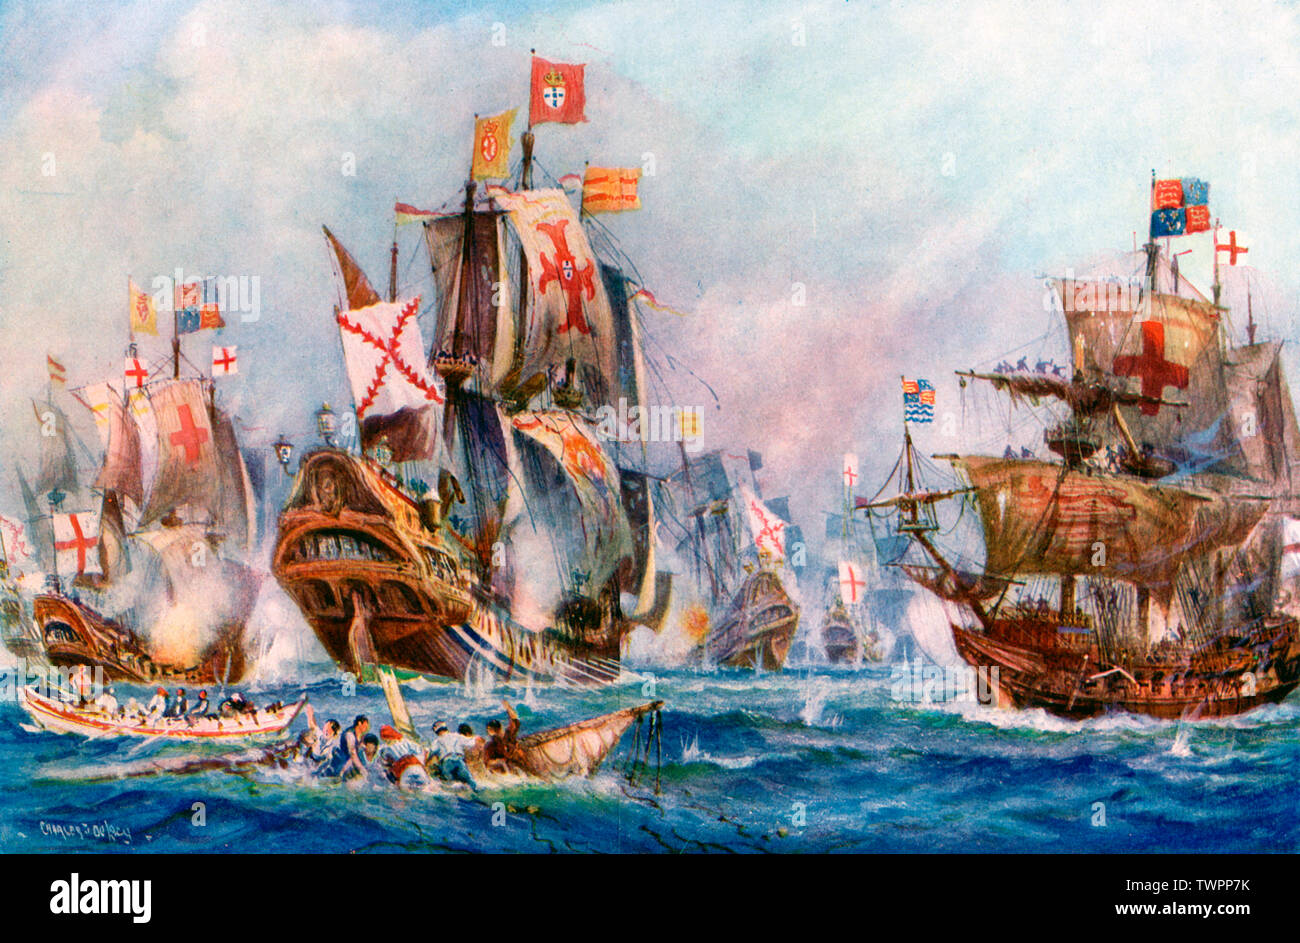 The Glorious Victory of Elizabeth's seamen over the Spanish Armada, 1588'.  By Charles De Lacy (1856-1929). The Spanish Armada was a Spanish navy fleet  famously used by King Philip II of Spain (